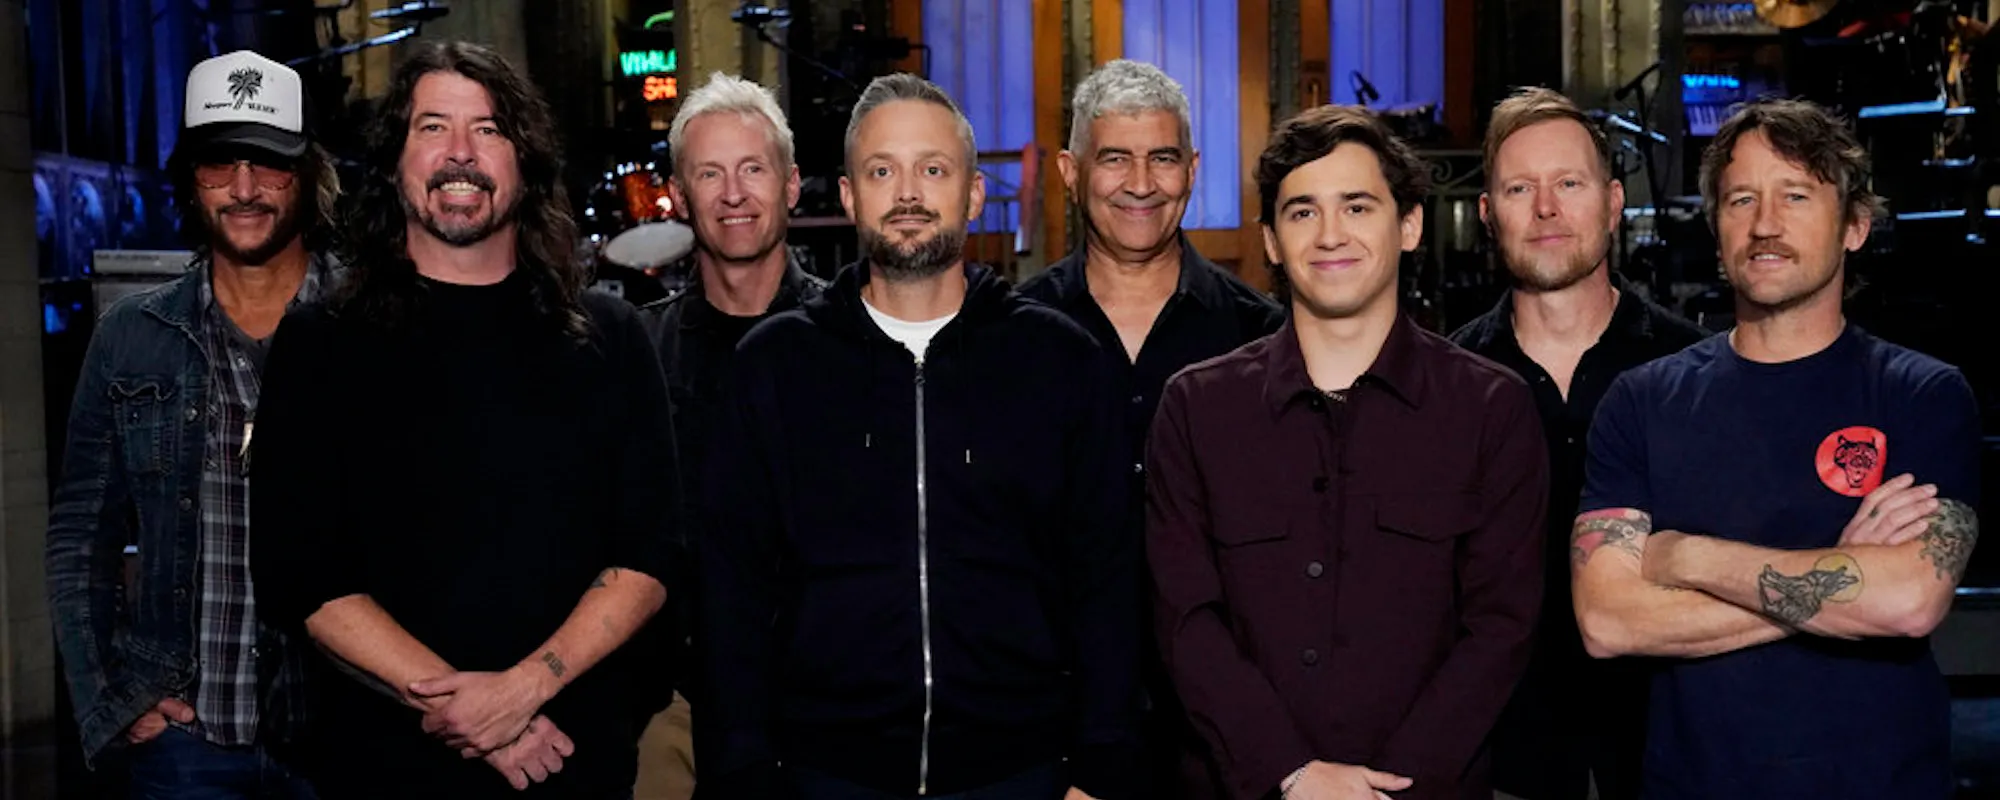 Watch Foo Fighters Return to ‘Saturday Night Live’ for Ninth Time Tonight